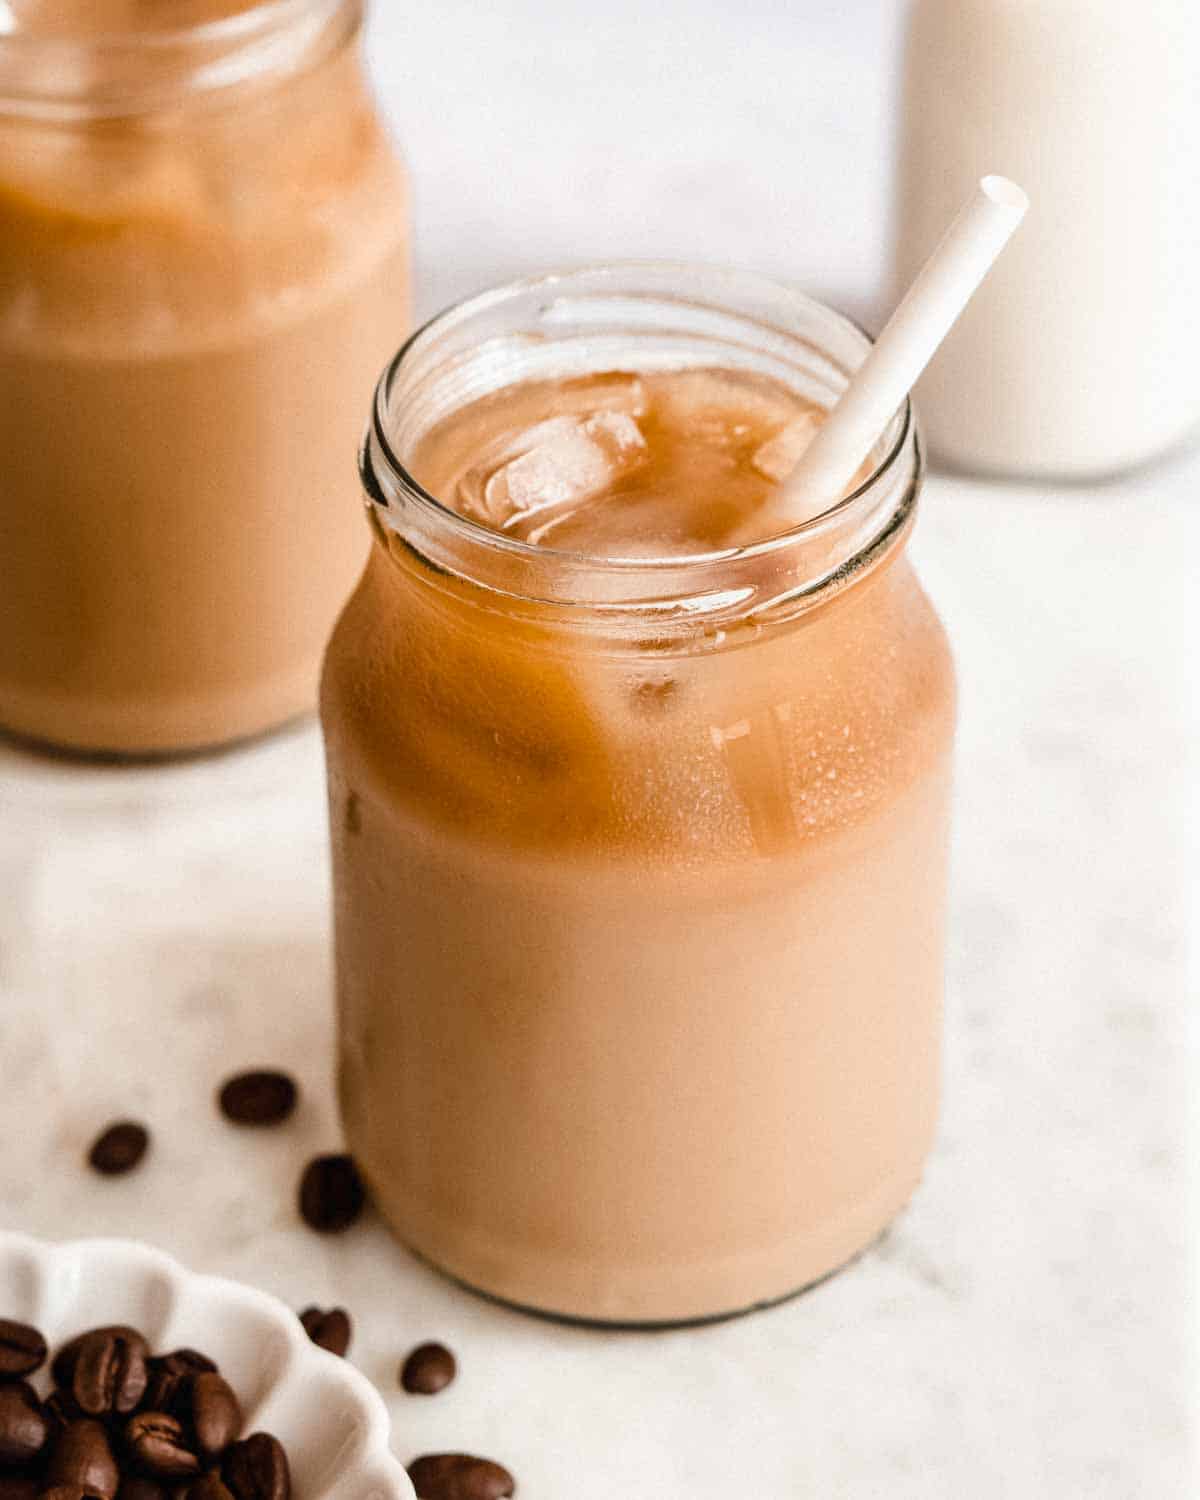 french press cold brew coffe concentrate diluted with milk in a serving glass.